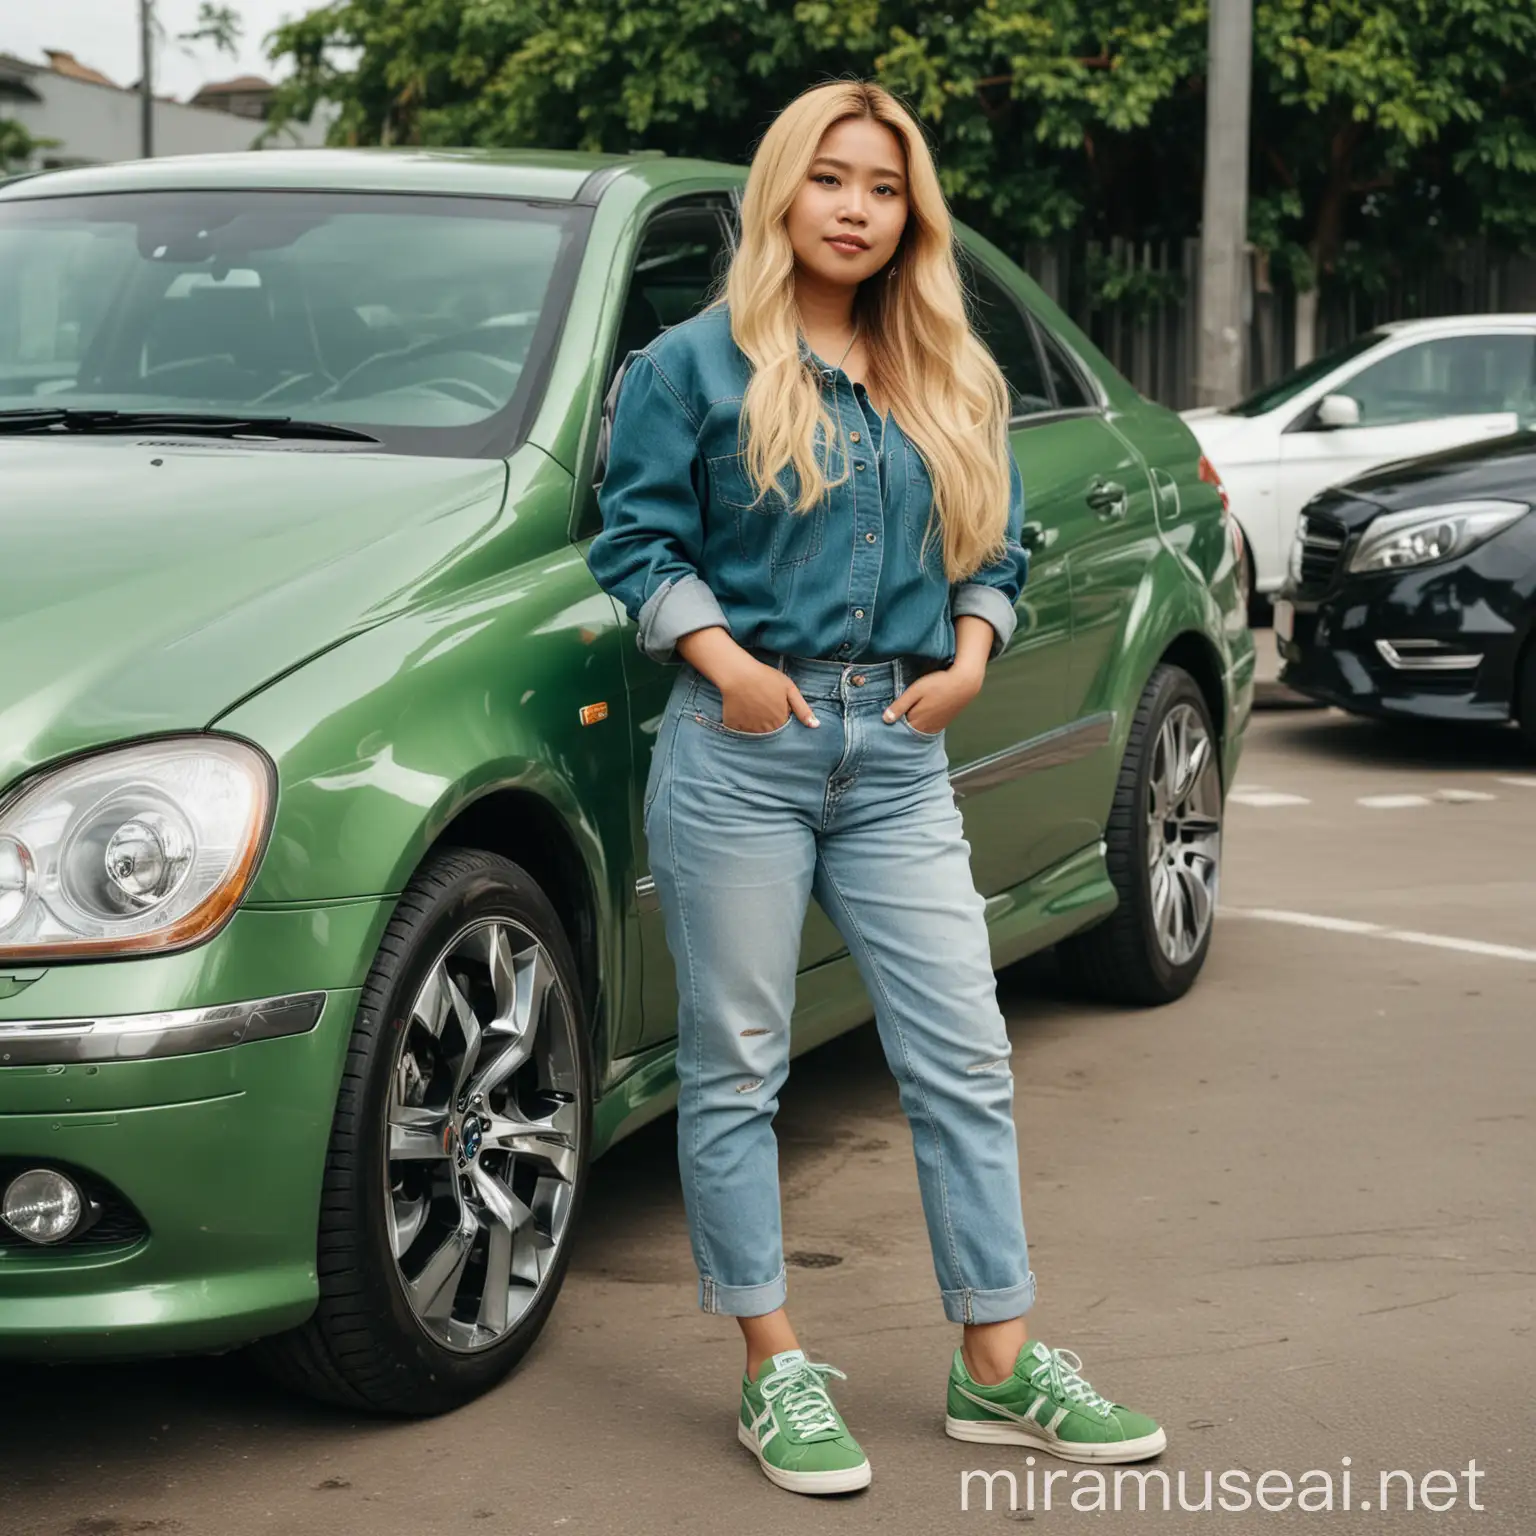 Indonesian Woman Posing with Blonde Hair and Onitsuka Shoes by Mercedes C200